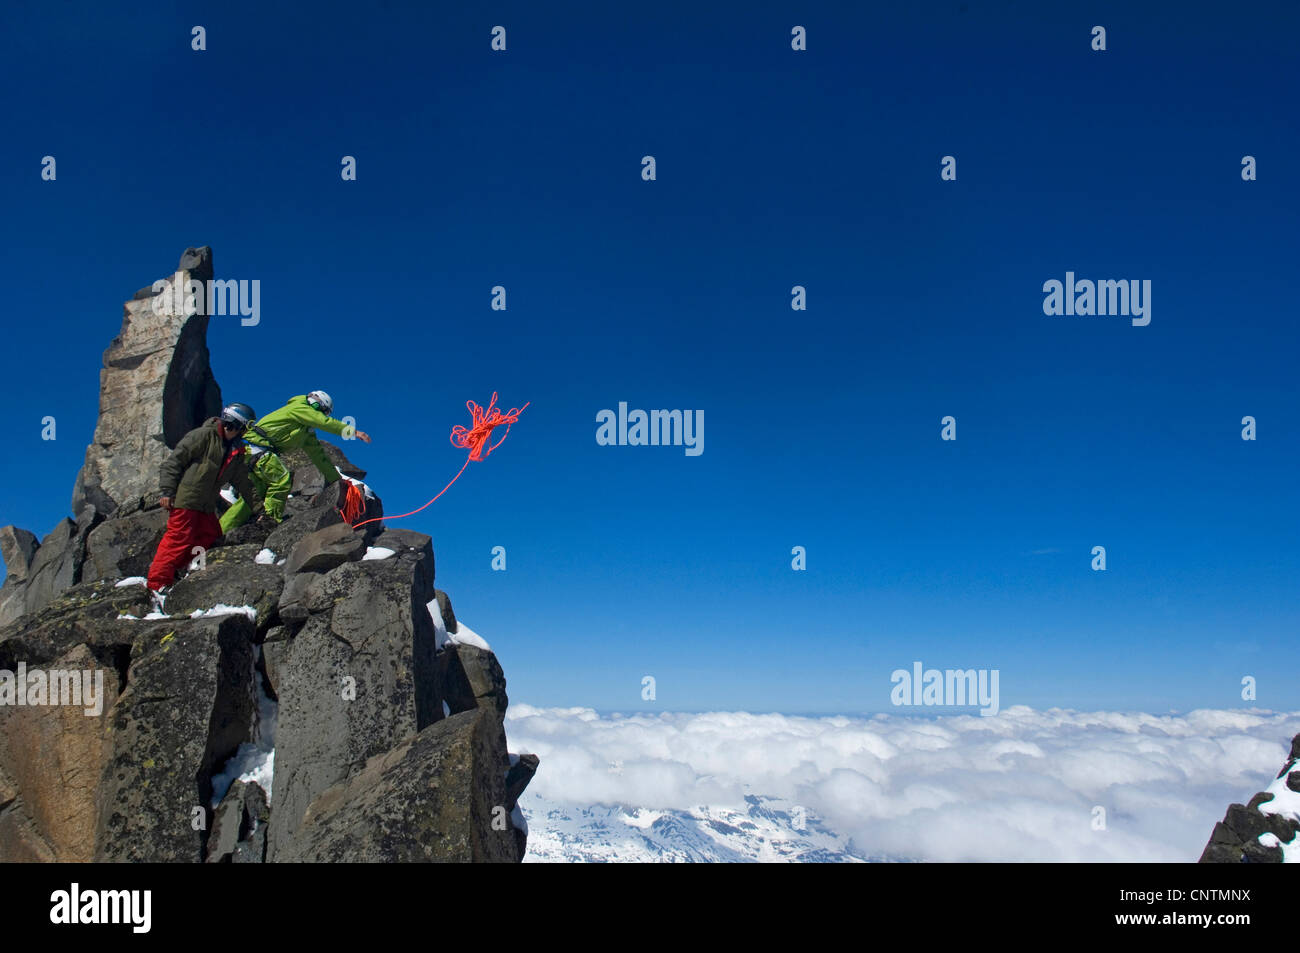 two ski alpinists climbing in the mountains, throwing the rope, France, Alps Stock Photo